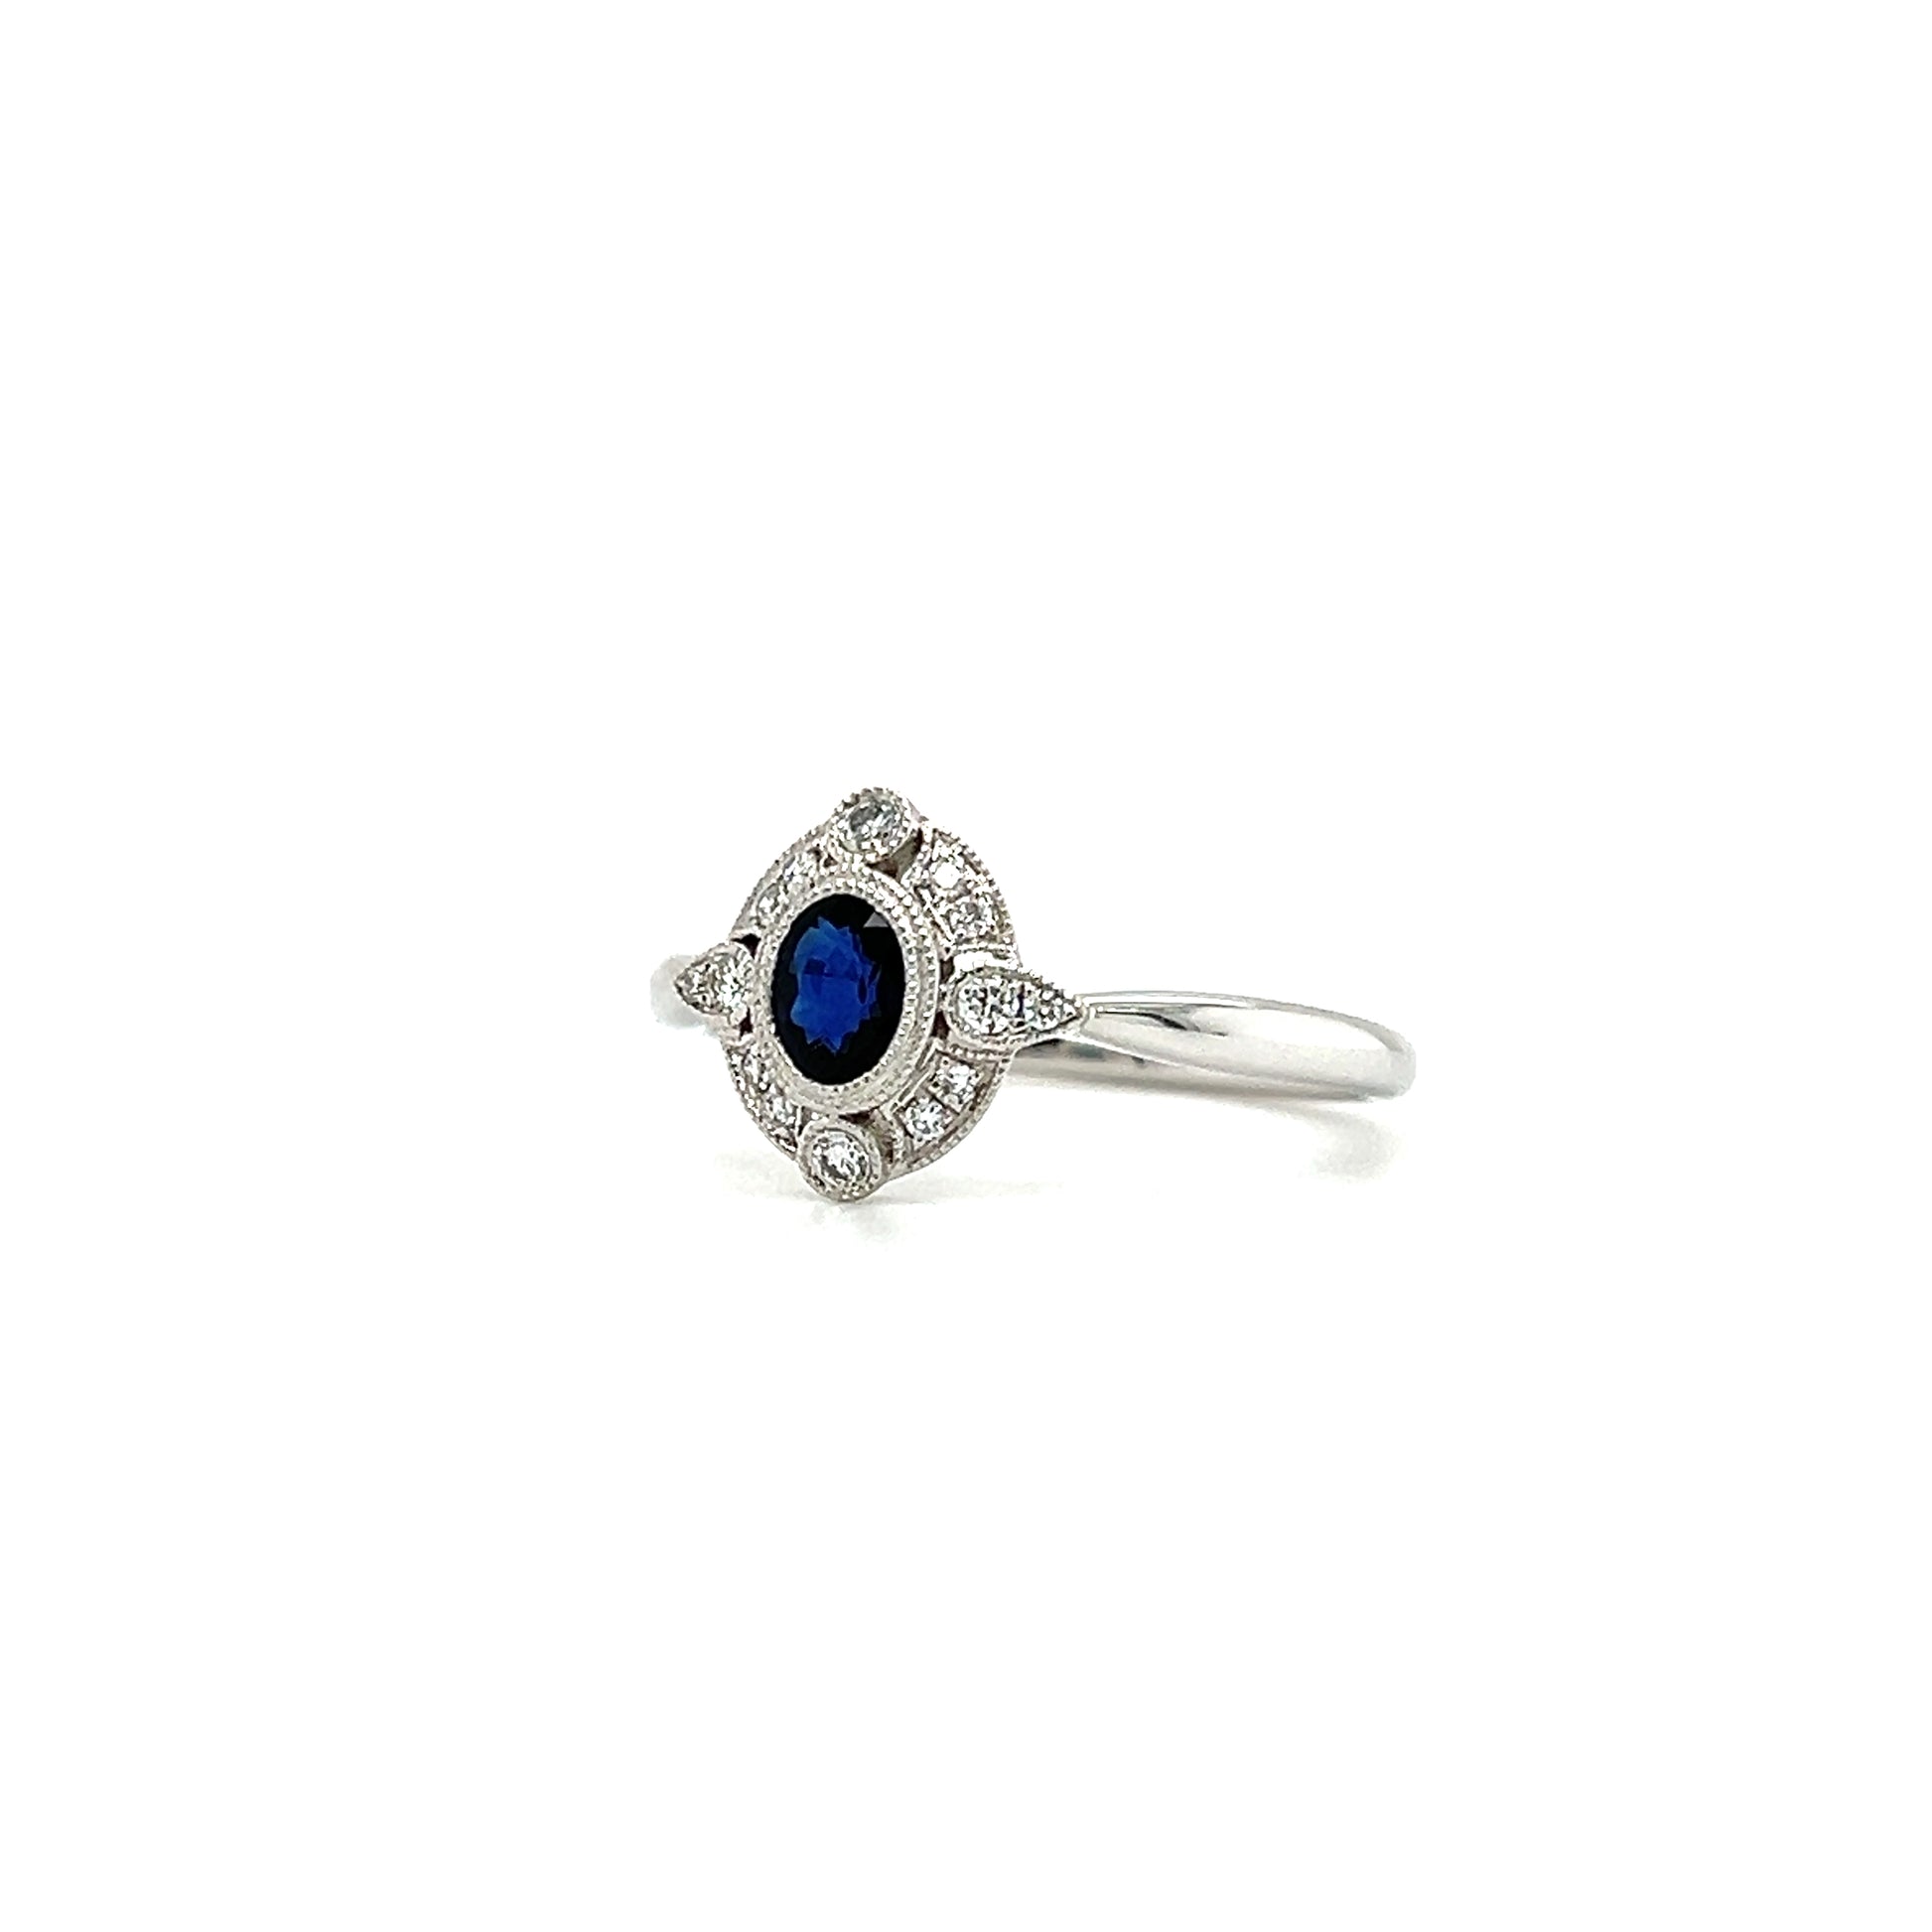 Blue Sapphire Ring with Milgrain Diamond Halo in 14K White Gold Right Side View